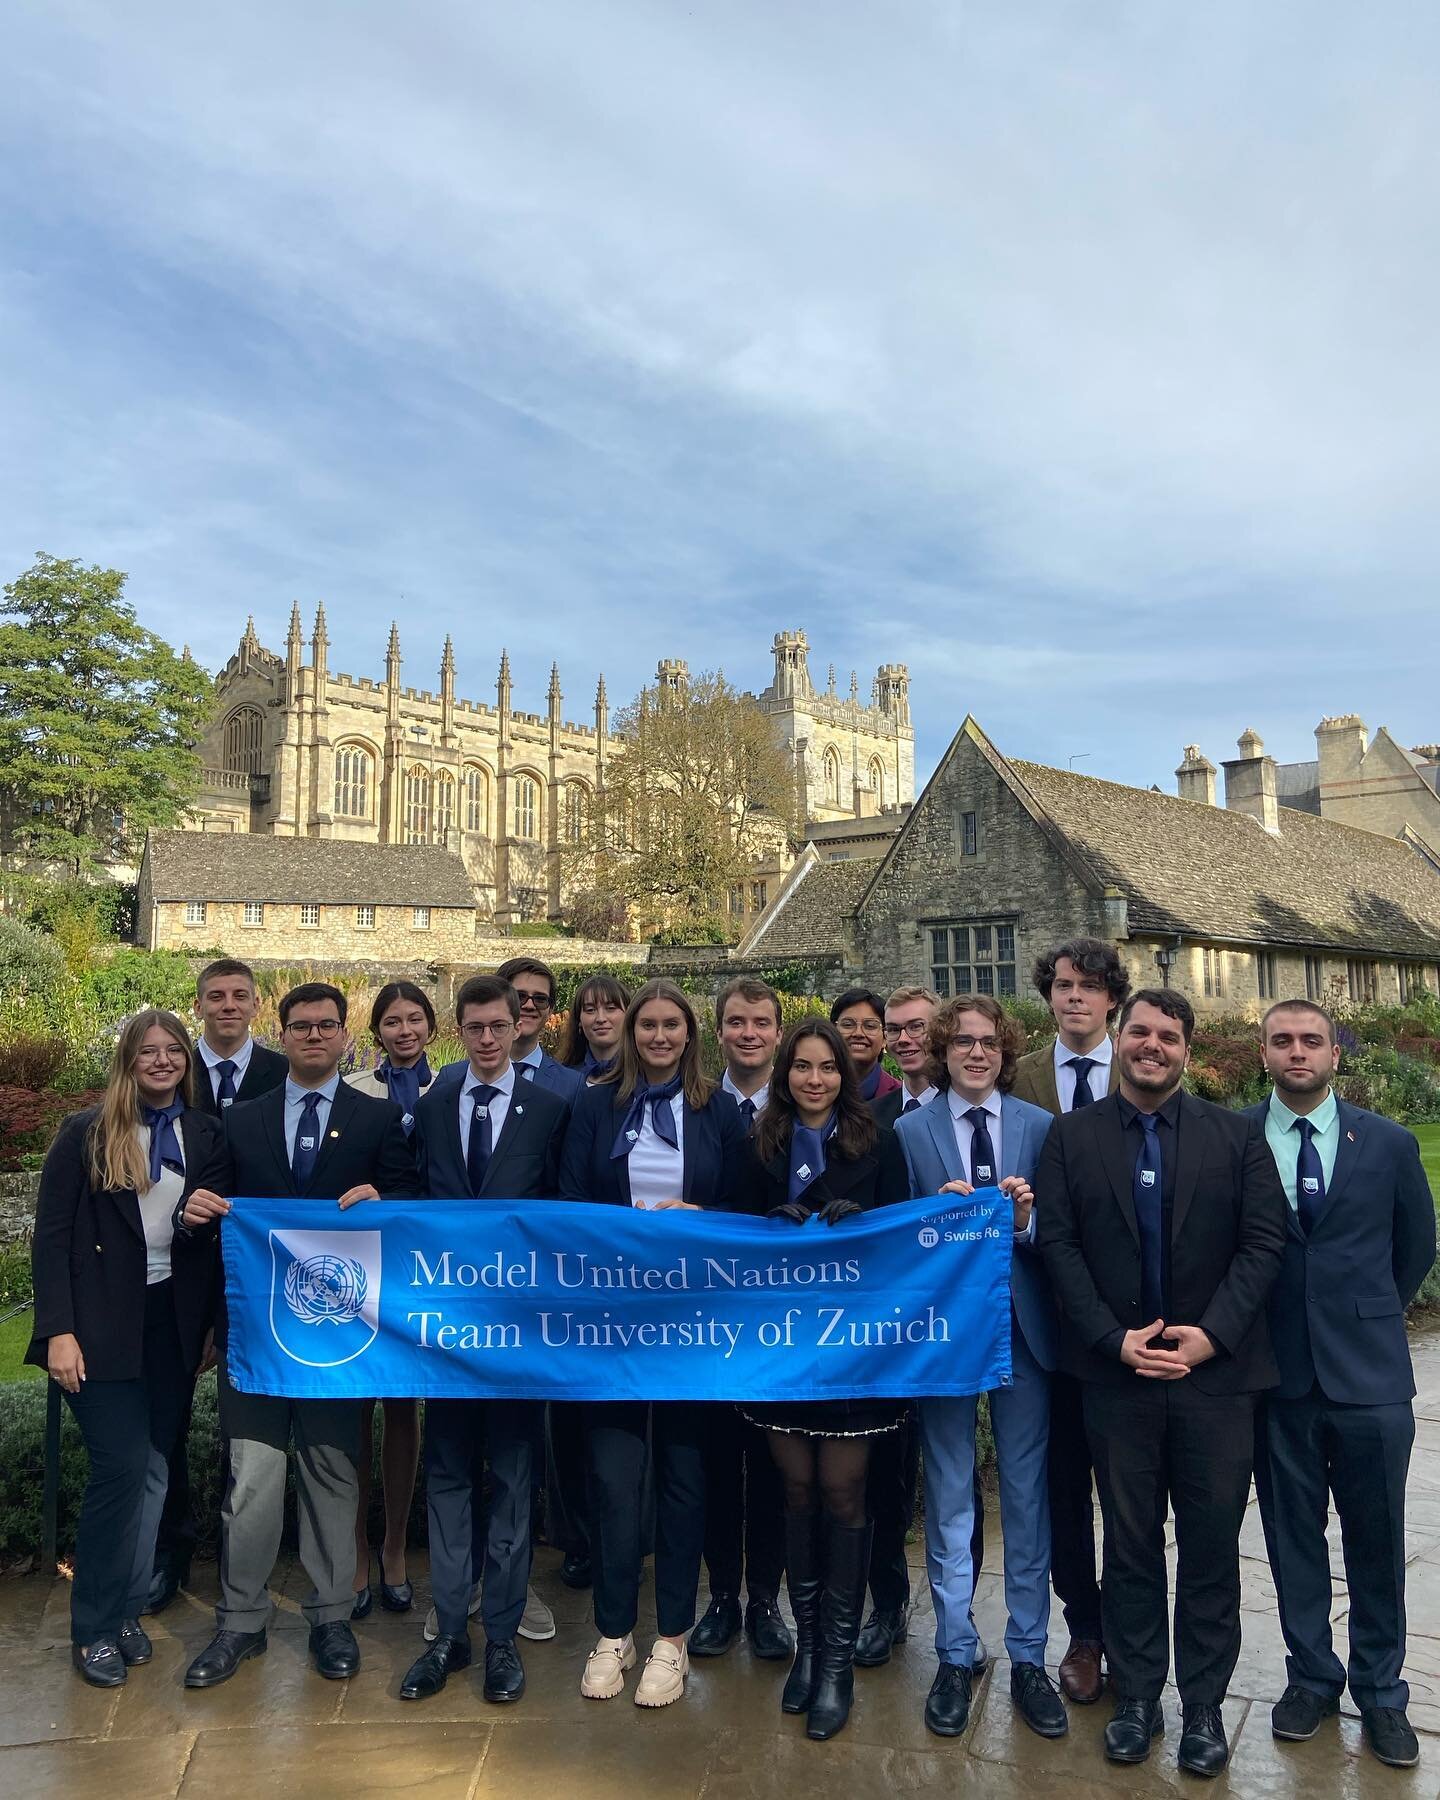 - OxIMUN 2023 Recap-

From 27th to 29th of October, MUN Team UZH had the pleasure of attending a conference organized by Oxford International Model United Nations.

During the Opening Ceremony, we heard speeches from The Lord Hannay of Chiswick, the 